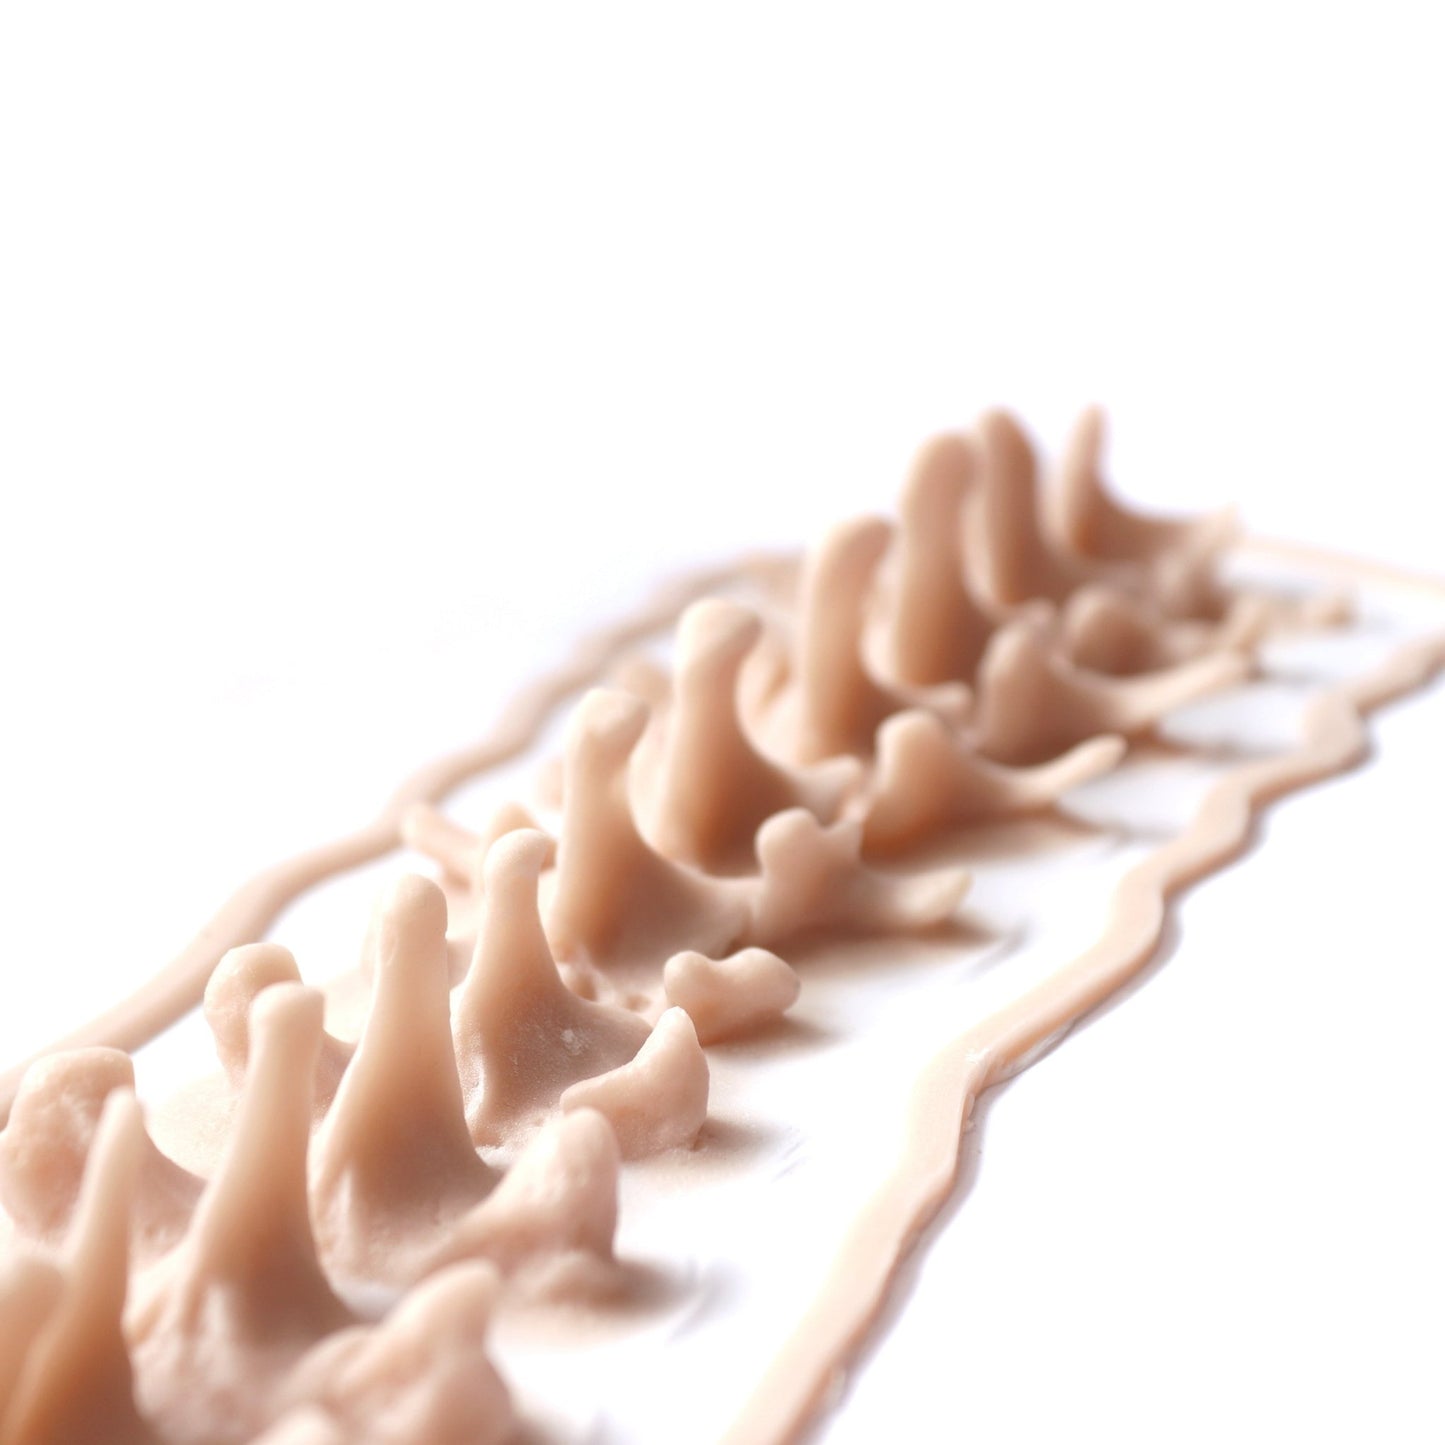 Protruding Spine (Lifesize) - Silicone makeup prosthetic in vanilla shade on a white surface